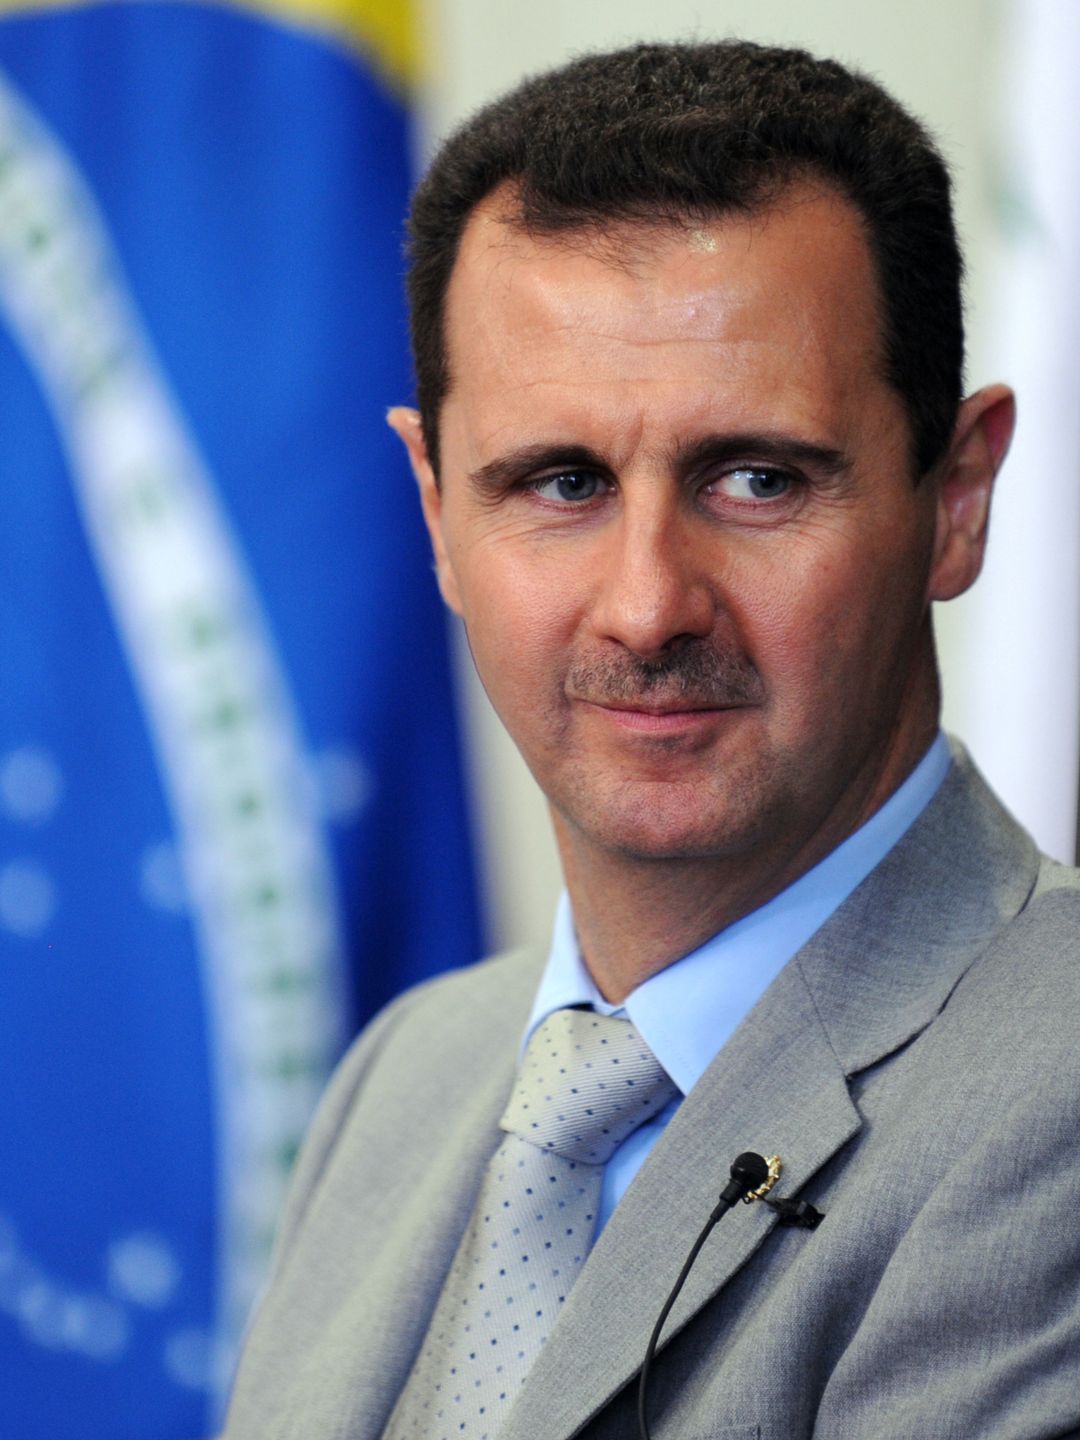 Bashar Assad who is his father